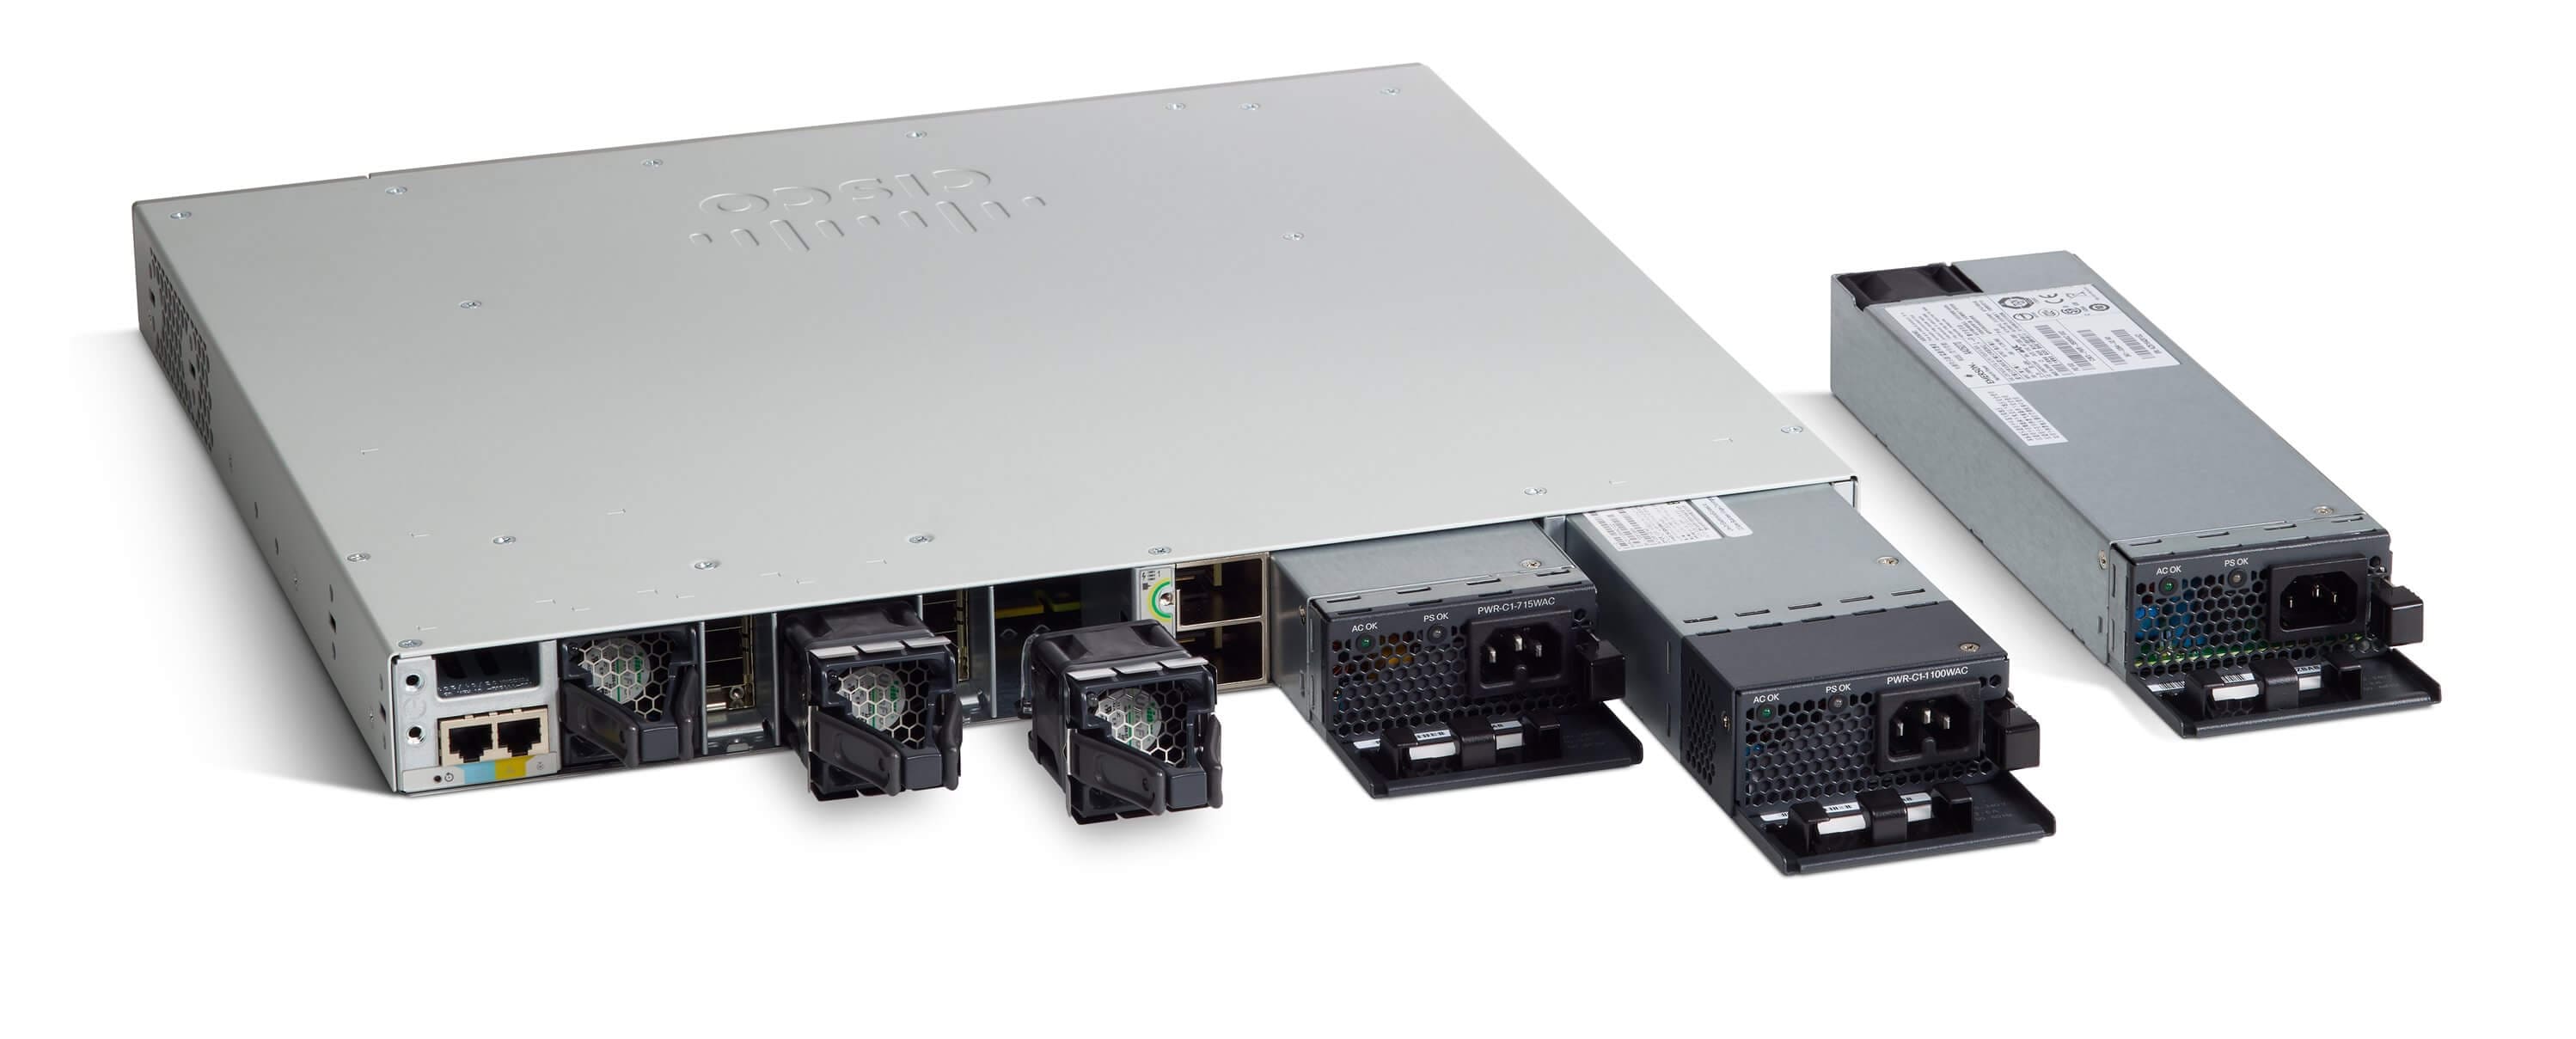 Product image of Cisco Catalyst 9300 Series Switches